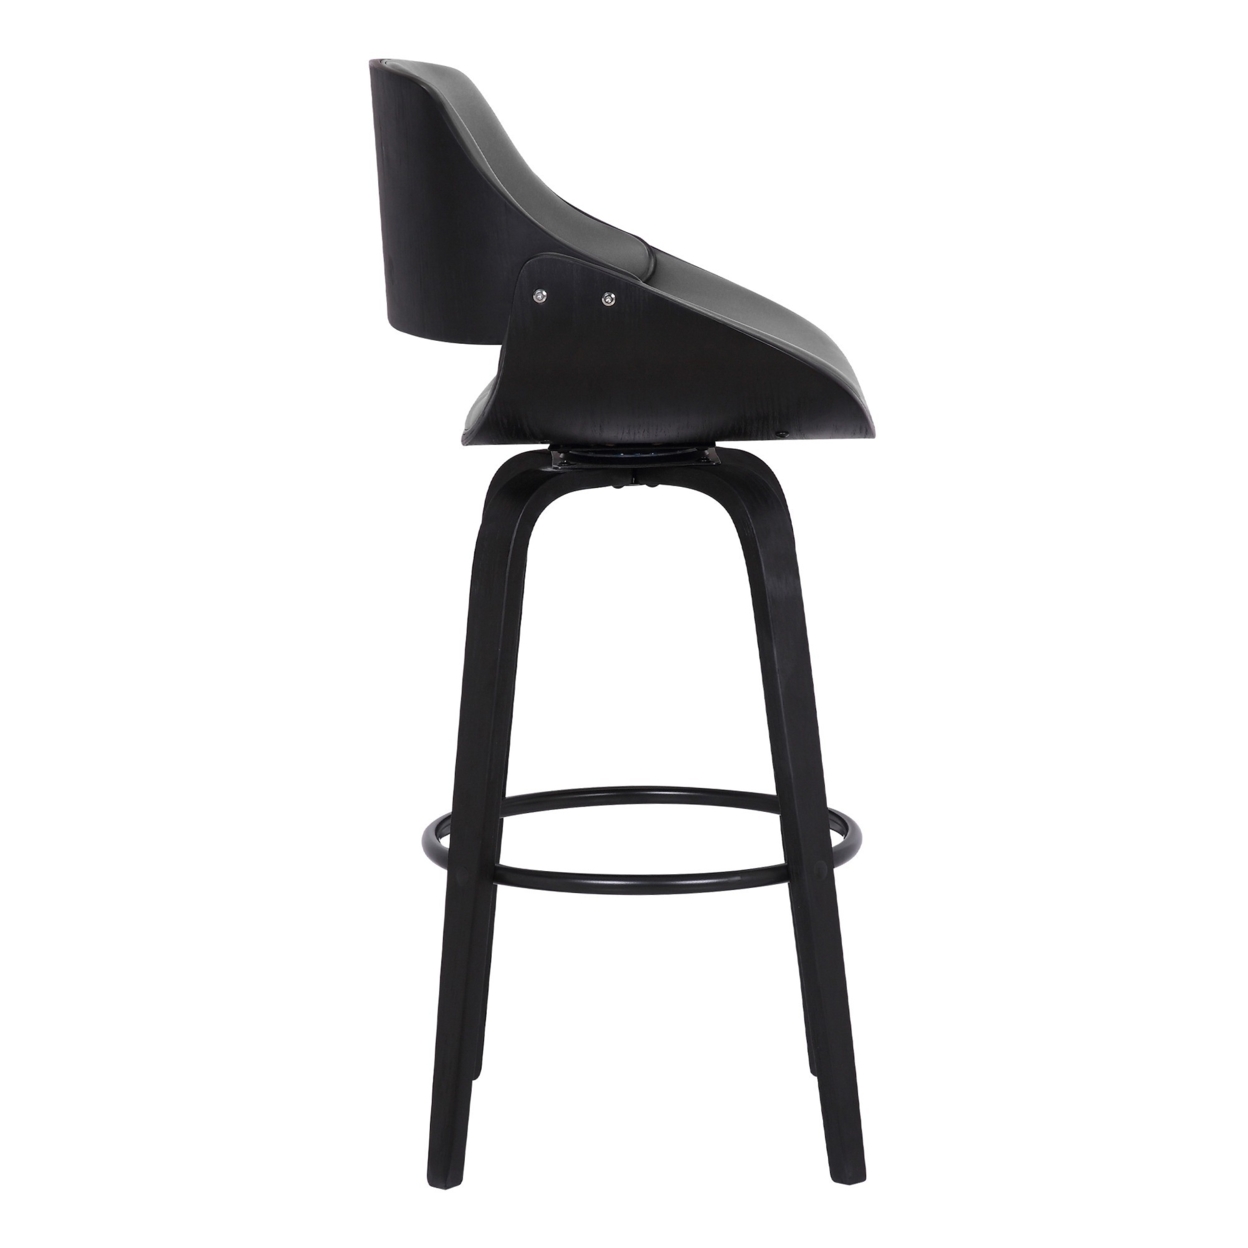 30 Inch Leatherette And Wooden Swivel Barstool, Black And Gray- Saltoro Sherpi